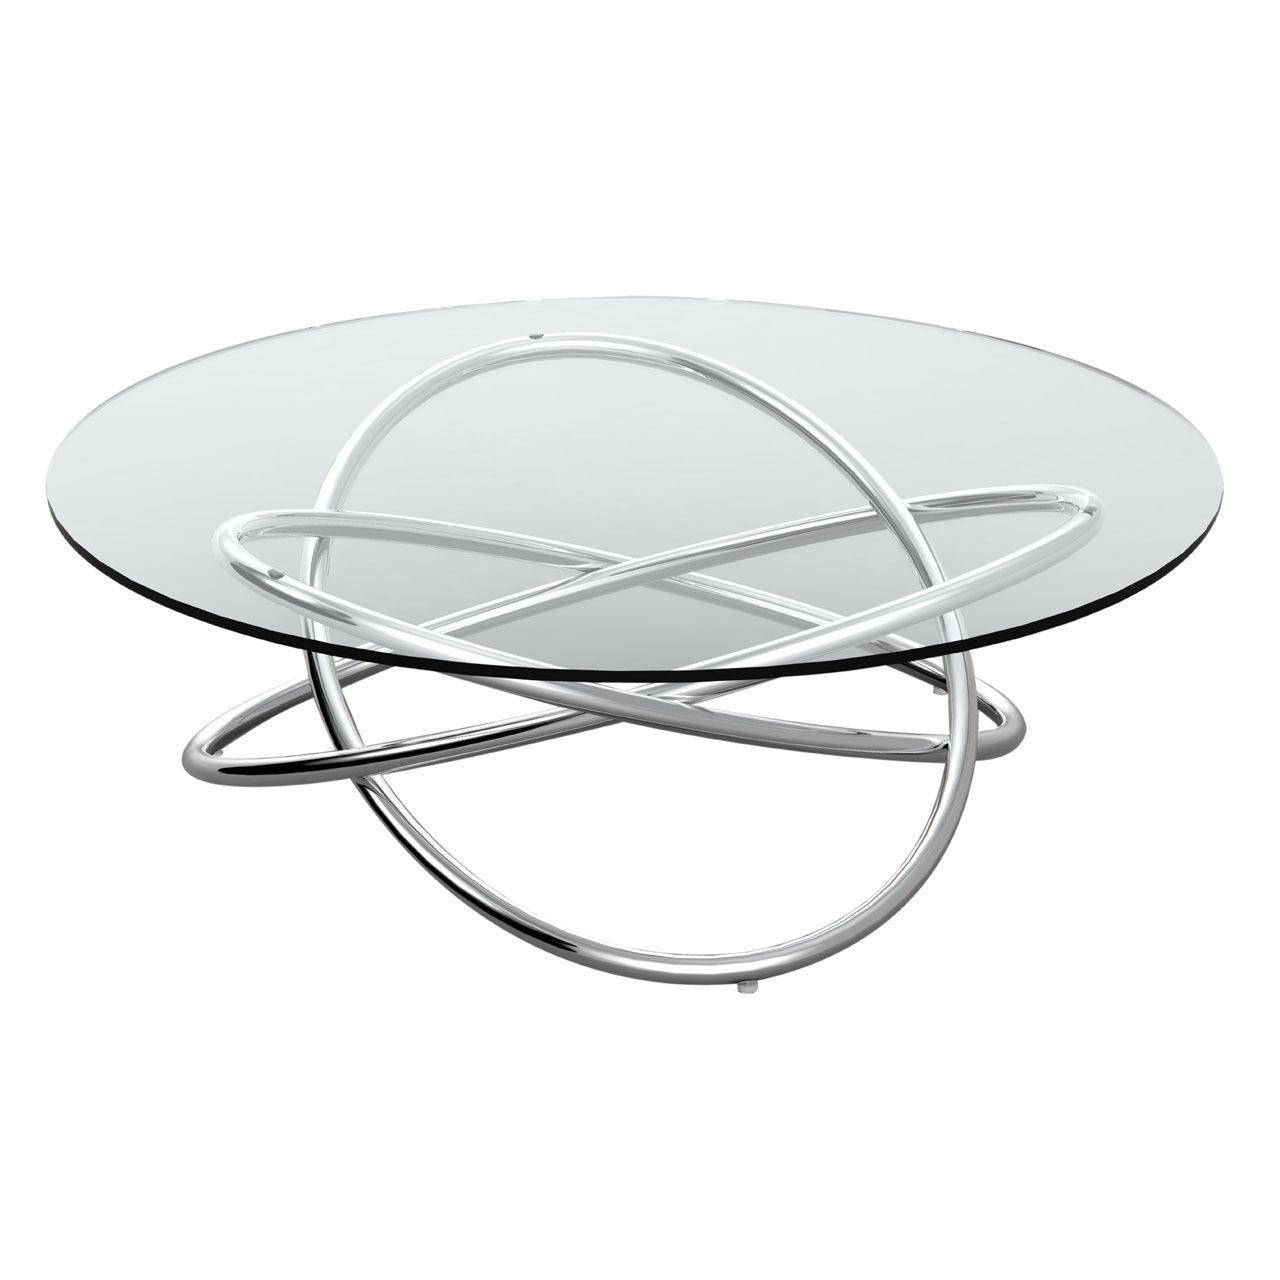 Round Glass Coffee Table, Glass Coffee Table With Regard To 2019 Silver Stainless Steel Coffee Tables (Gallery 4 of 20)